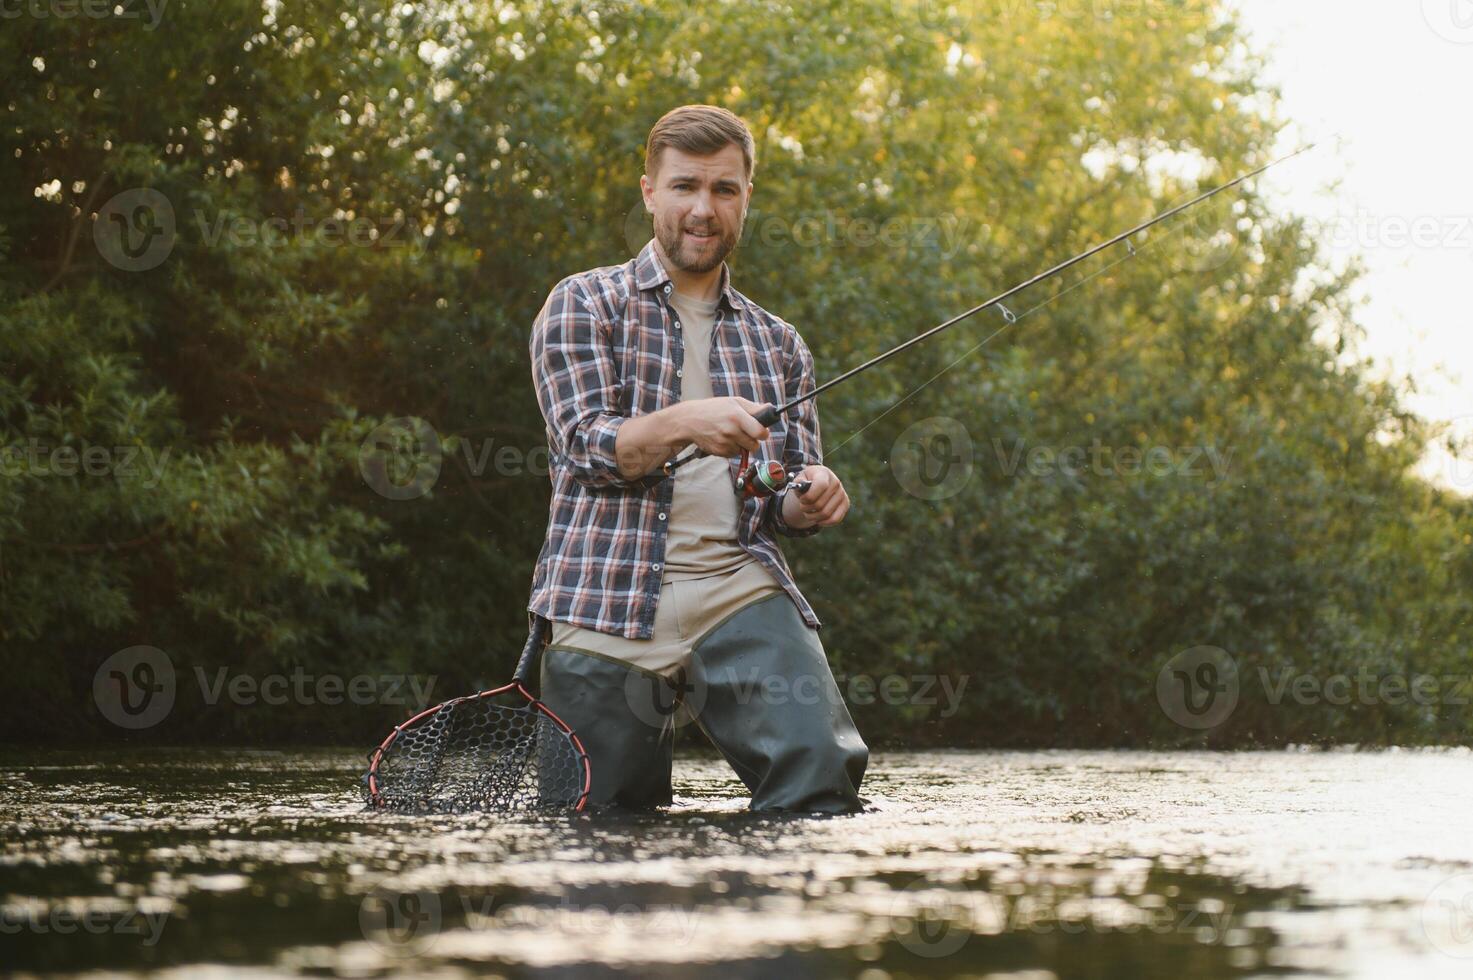 Male hobby. Ready for fishing. Relax in natural environment. Trout bait. Bearded elegant man. Man relaxing nature background. Strategy. Hobby sport activity. Activity and hobby. Catching and fishing photo